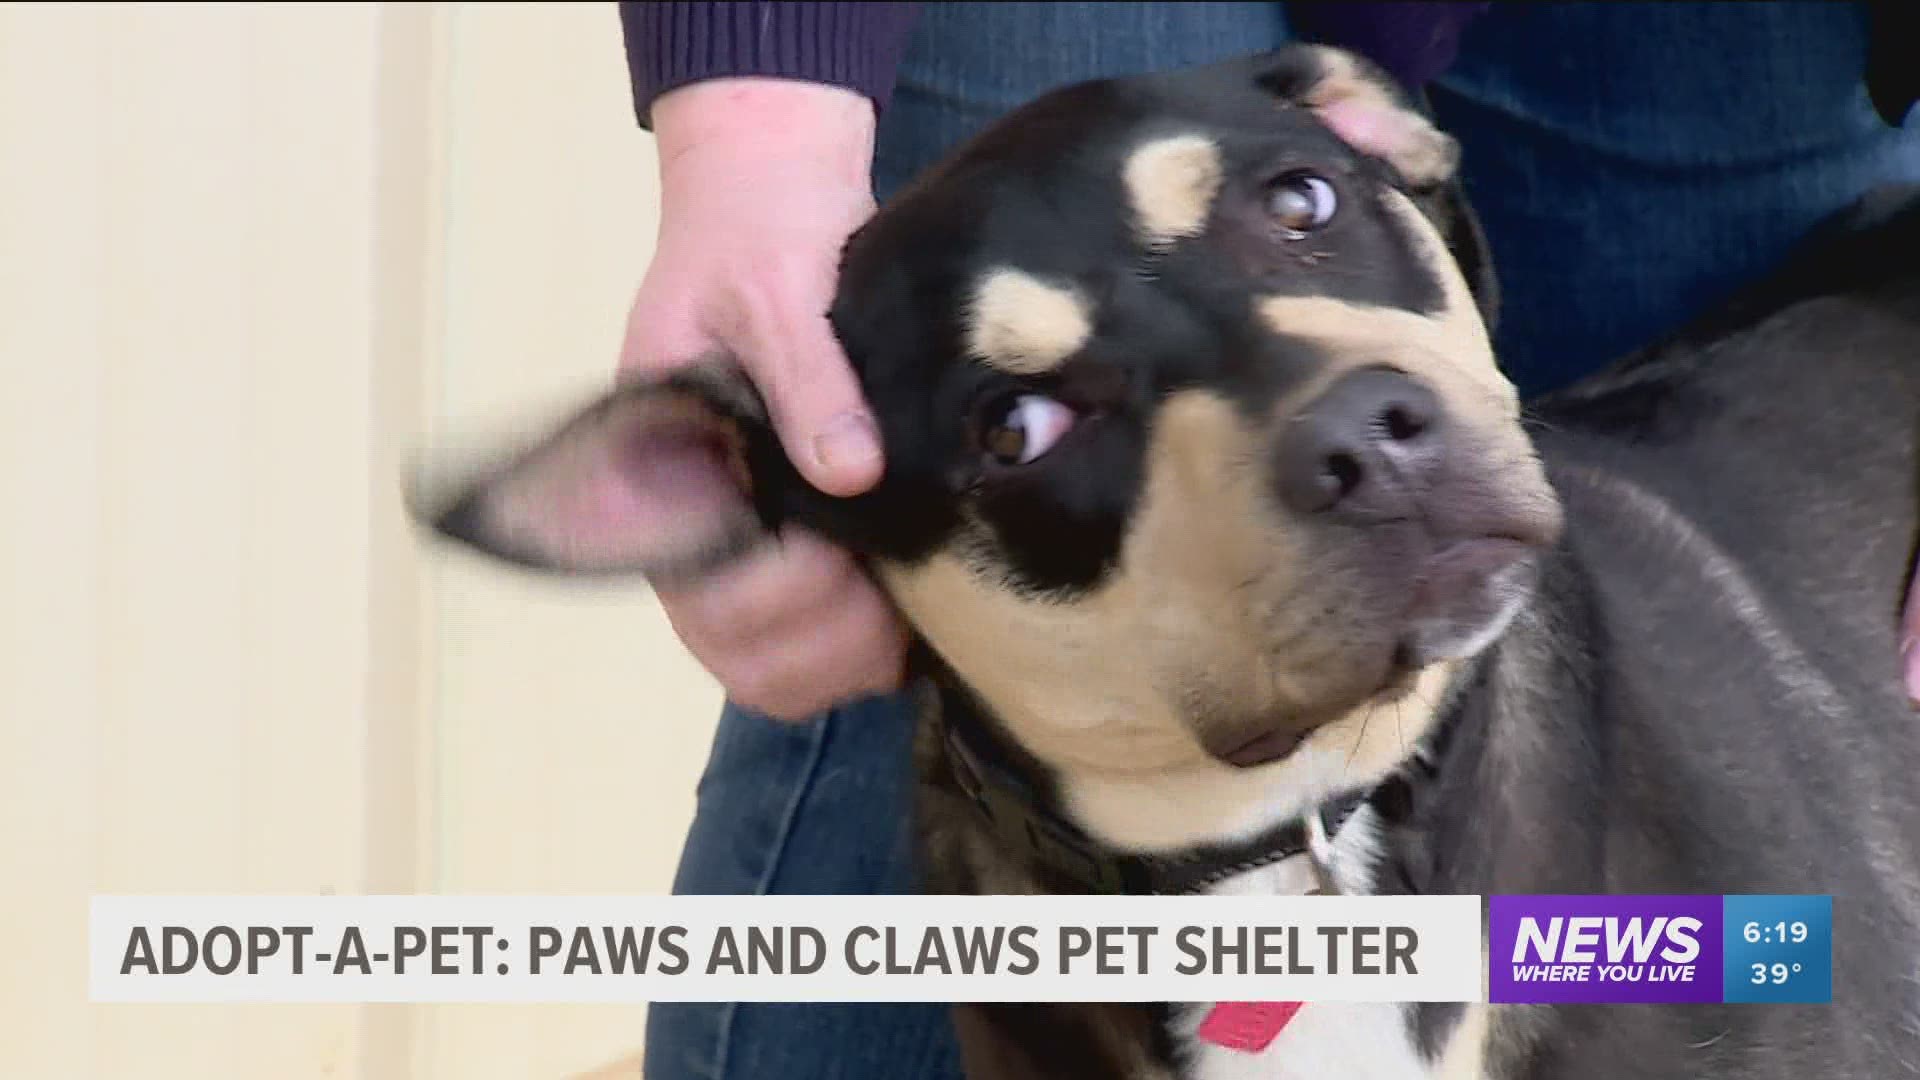 Several sweet dogs are up for adoption at Paws and Claws Shelter in Huntsville. https://bit.ly/3sKoYpx